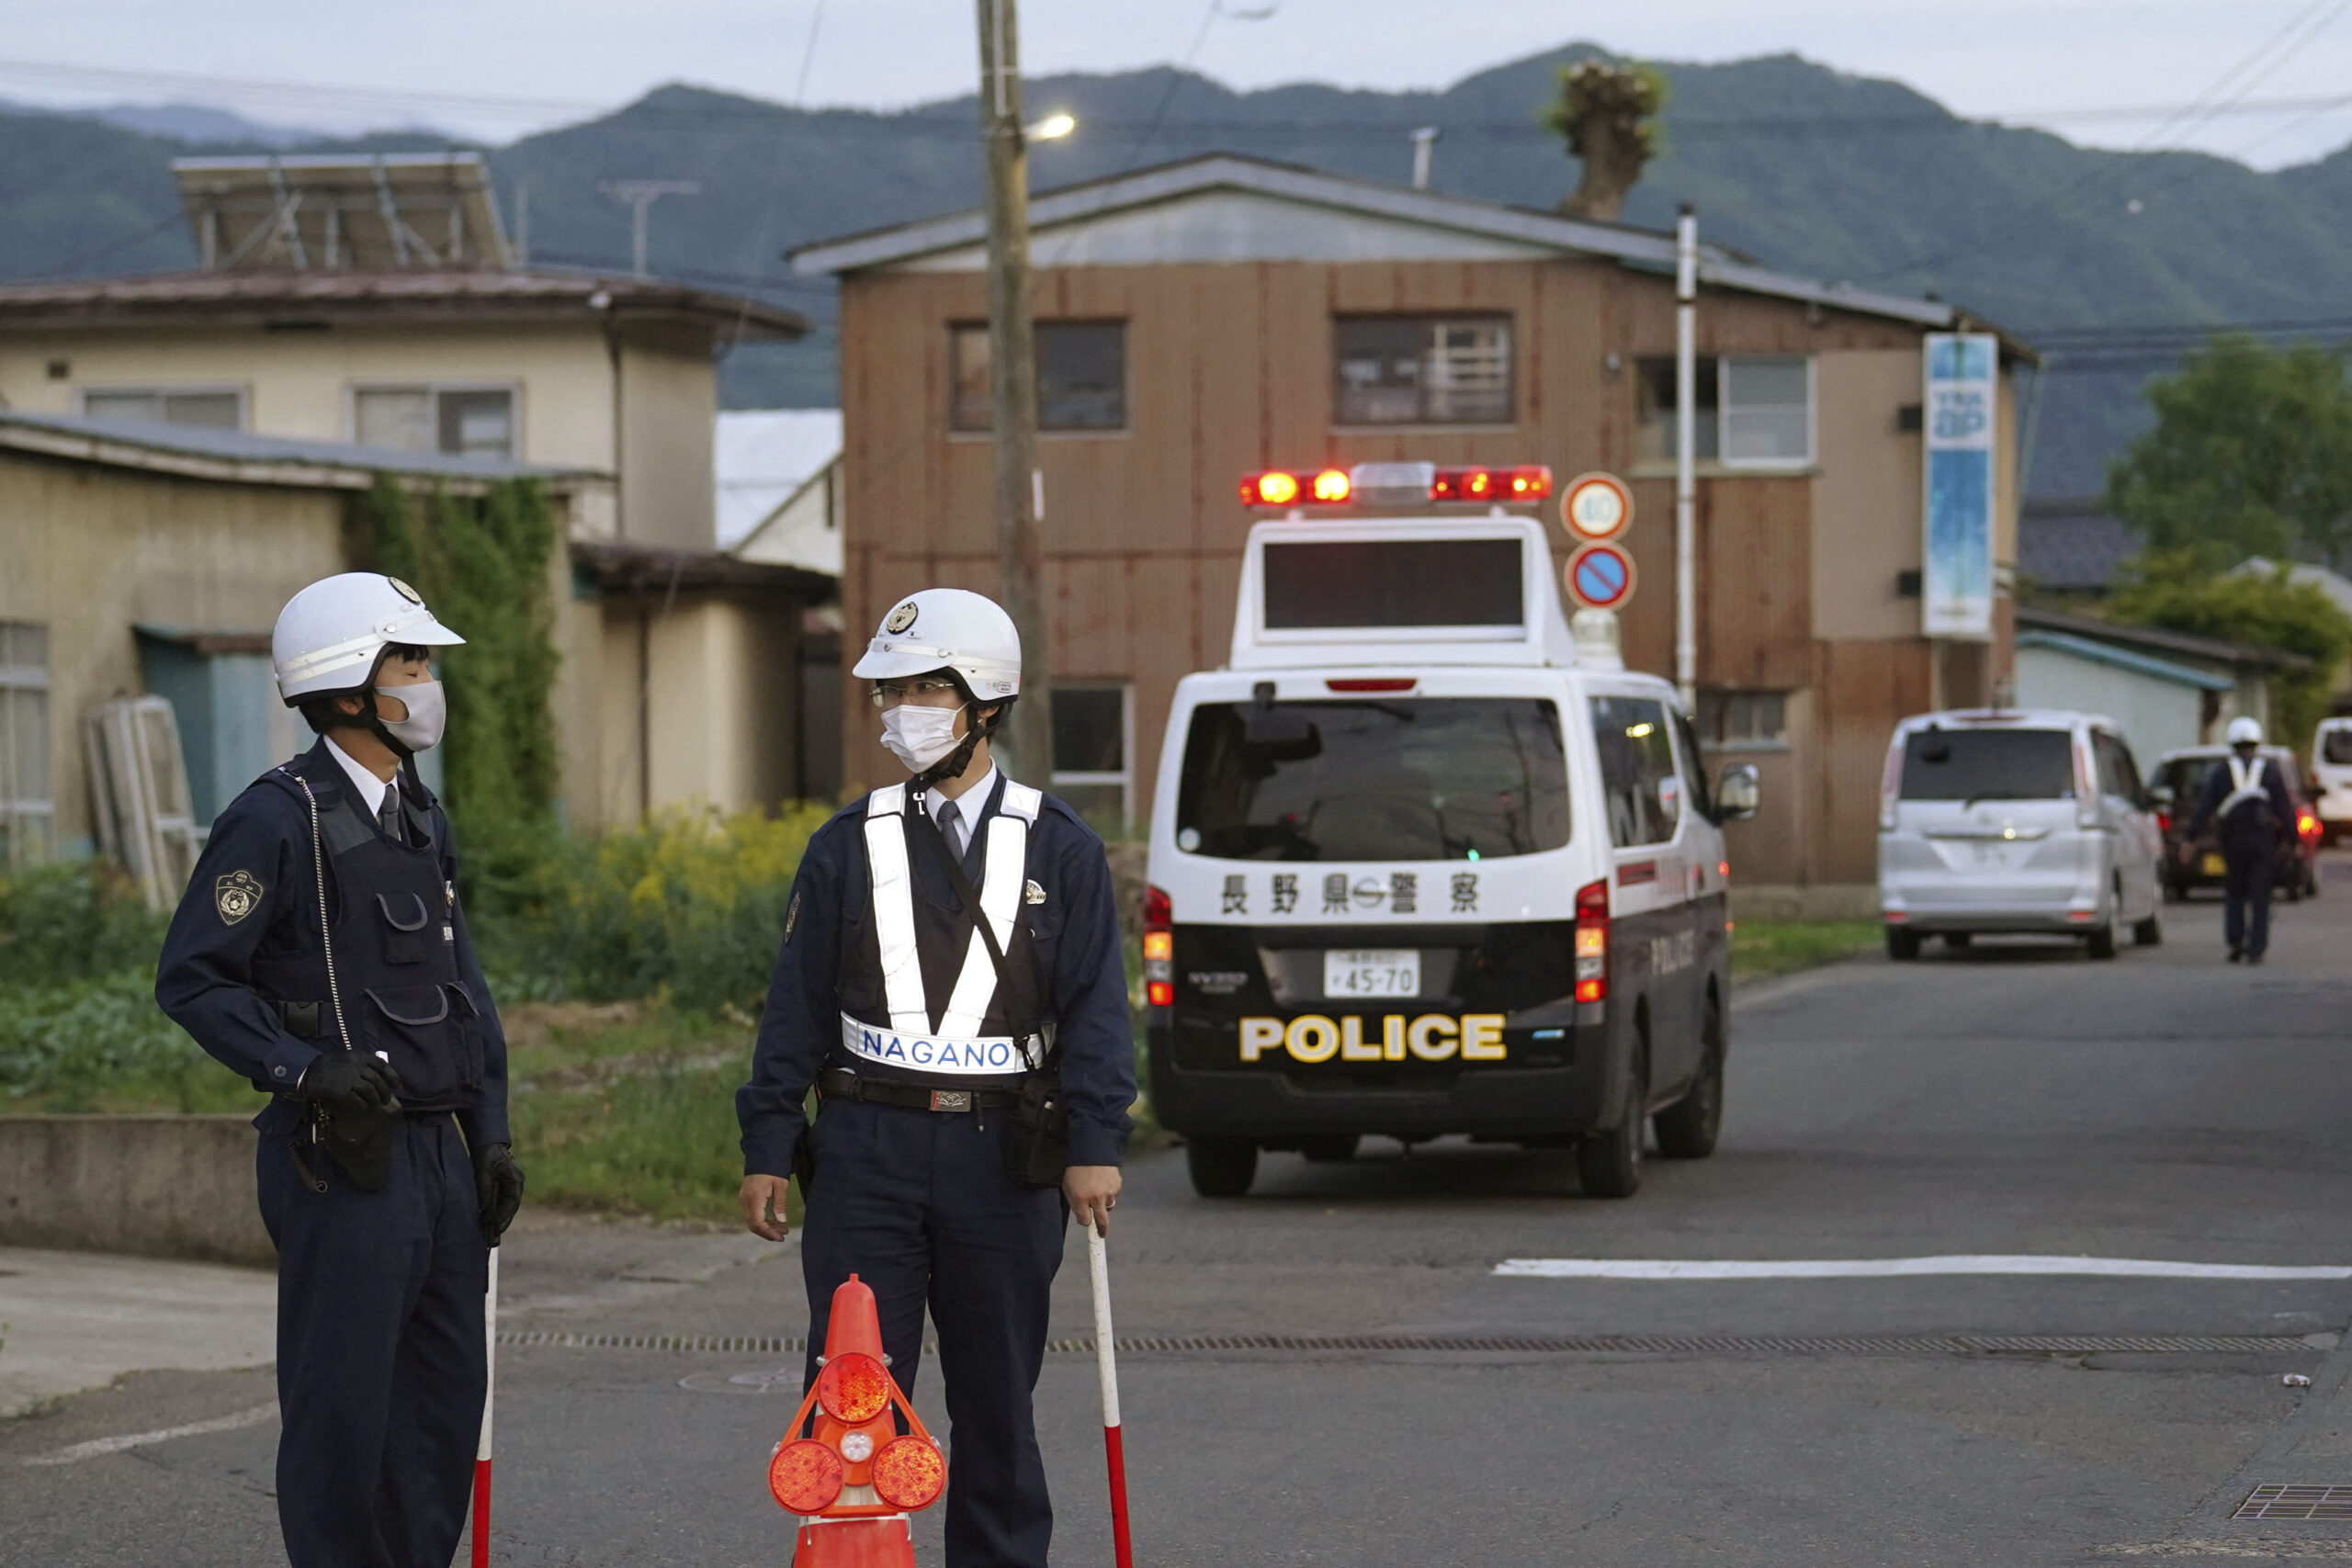 Suspect arrested after 4 killed in stabbing, shooting in central Japan